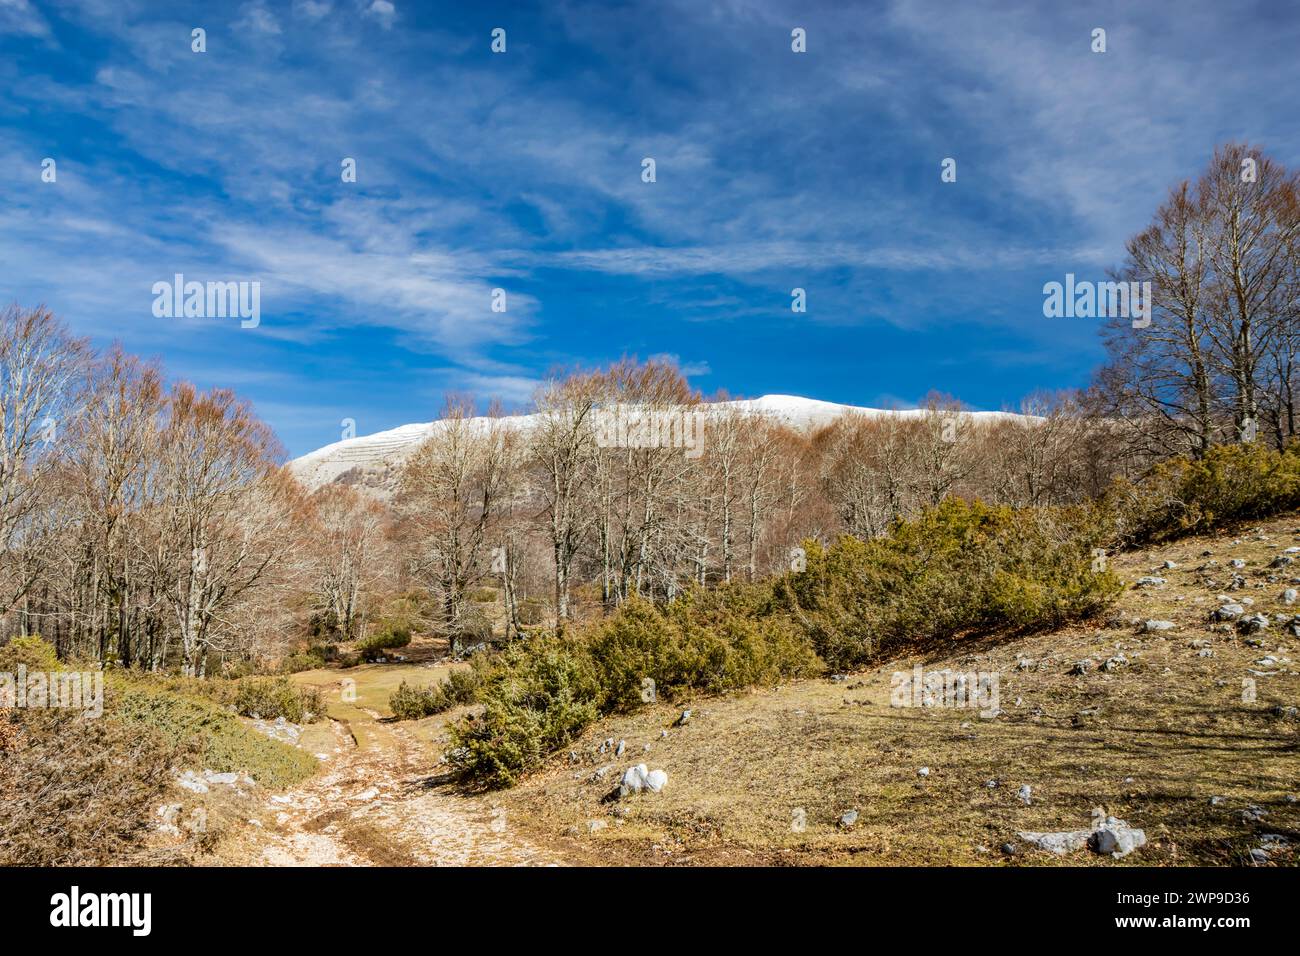 A beech forest, in Campo Felice, Italy. On the mountains of the Abruzzo Apennines. The bare trees in winter, the clear blue sky, the snow-capped mount Stock Photo